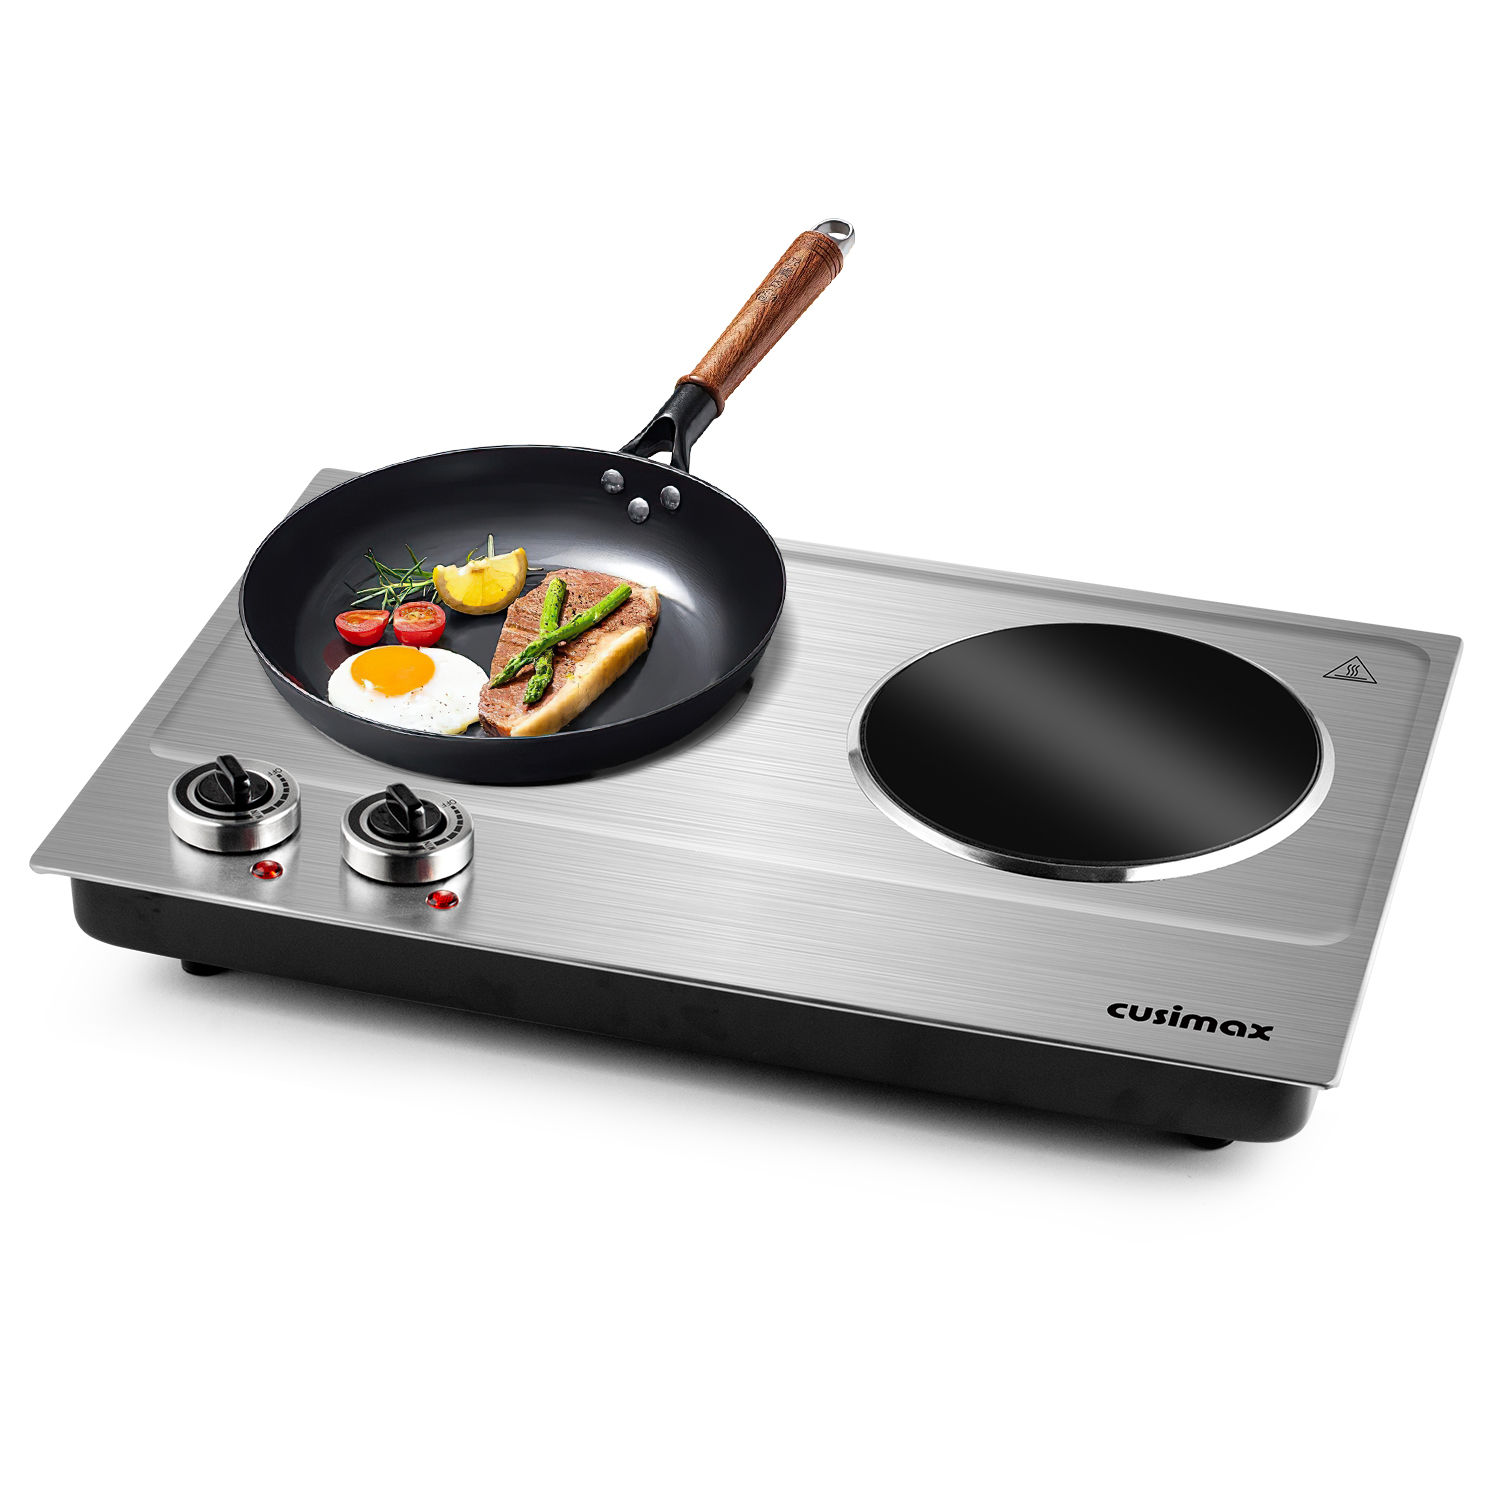 Cusimax 1800W Infrared Ceramic Electric Hot Plate for Cooking, Portable Countertop Burner Glass Heating Plate with 2 Knob Control,Stainless Steel Electric Stove,Easy To Clean